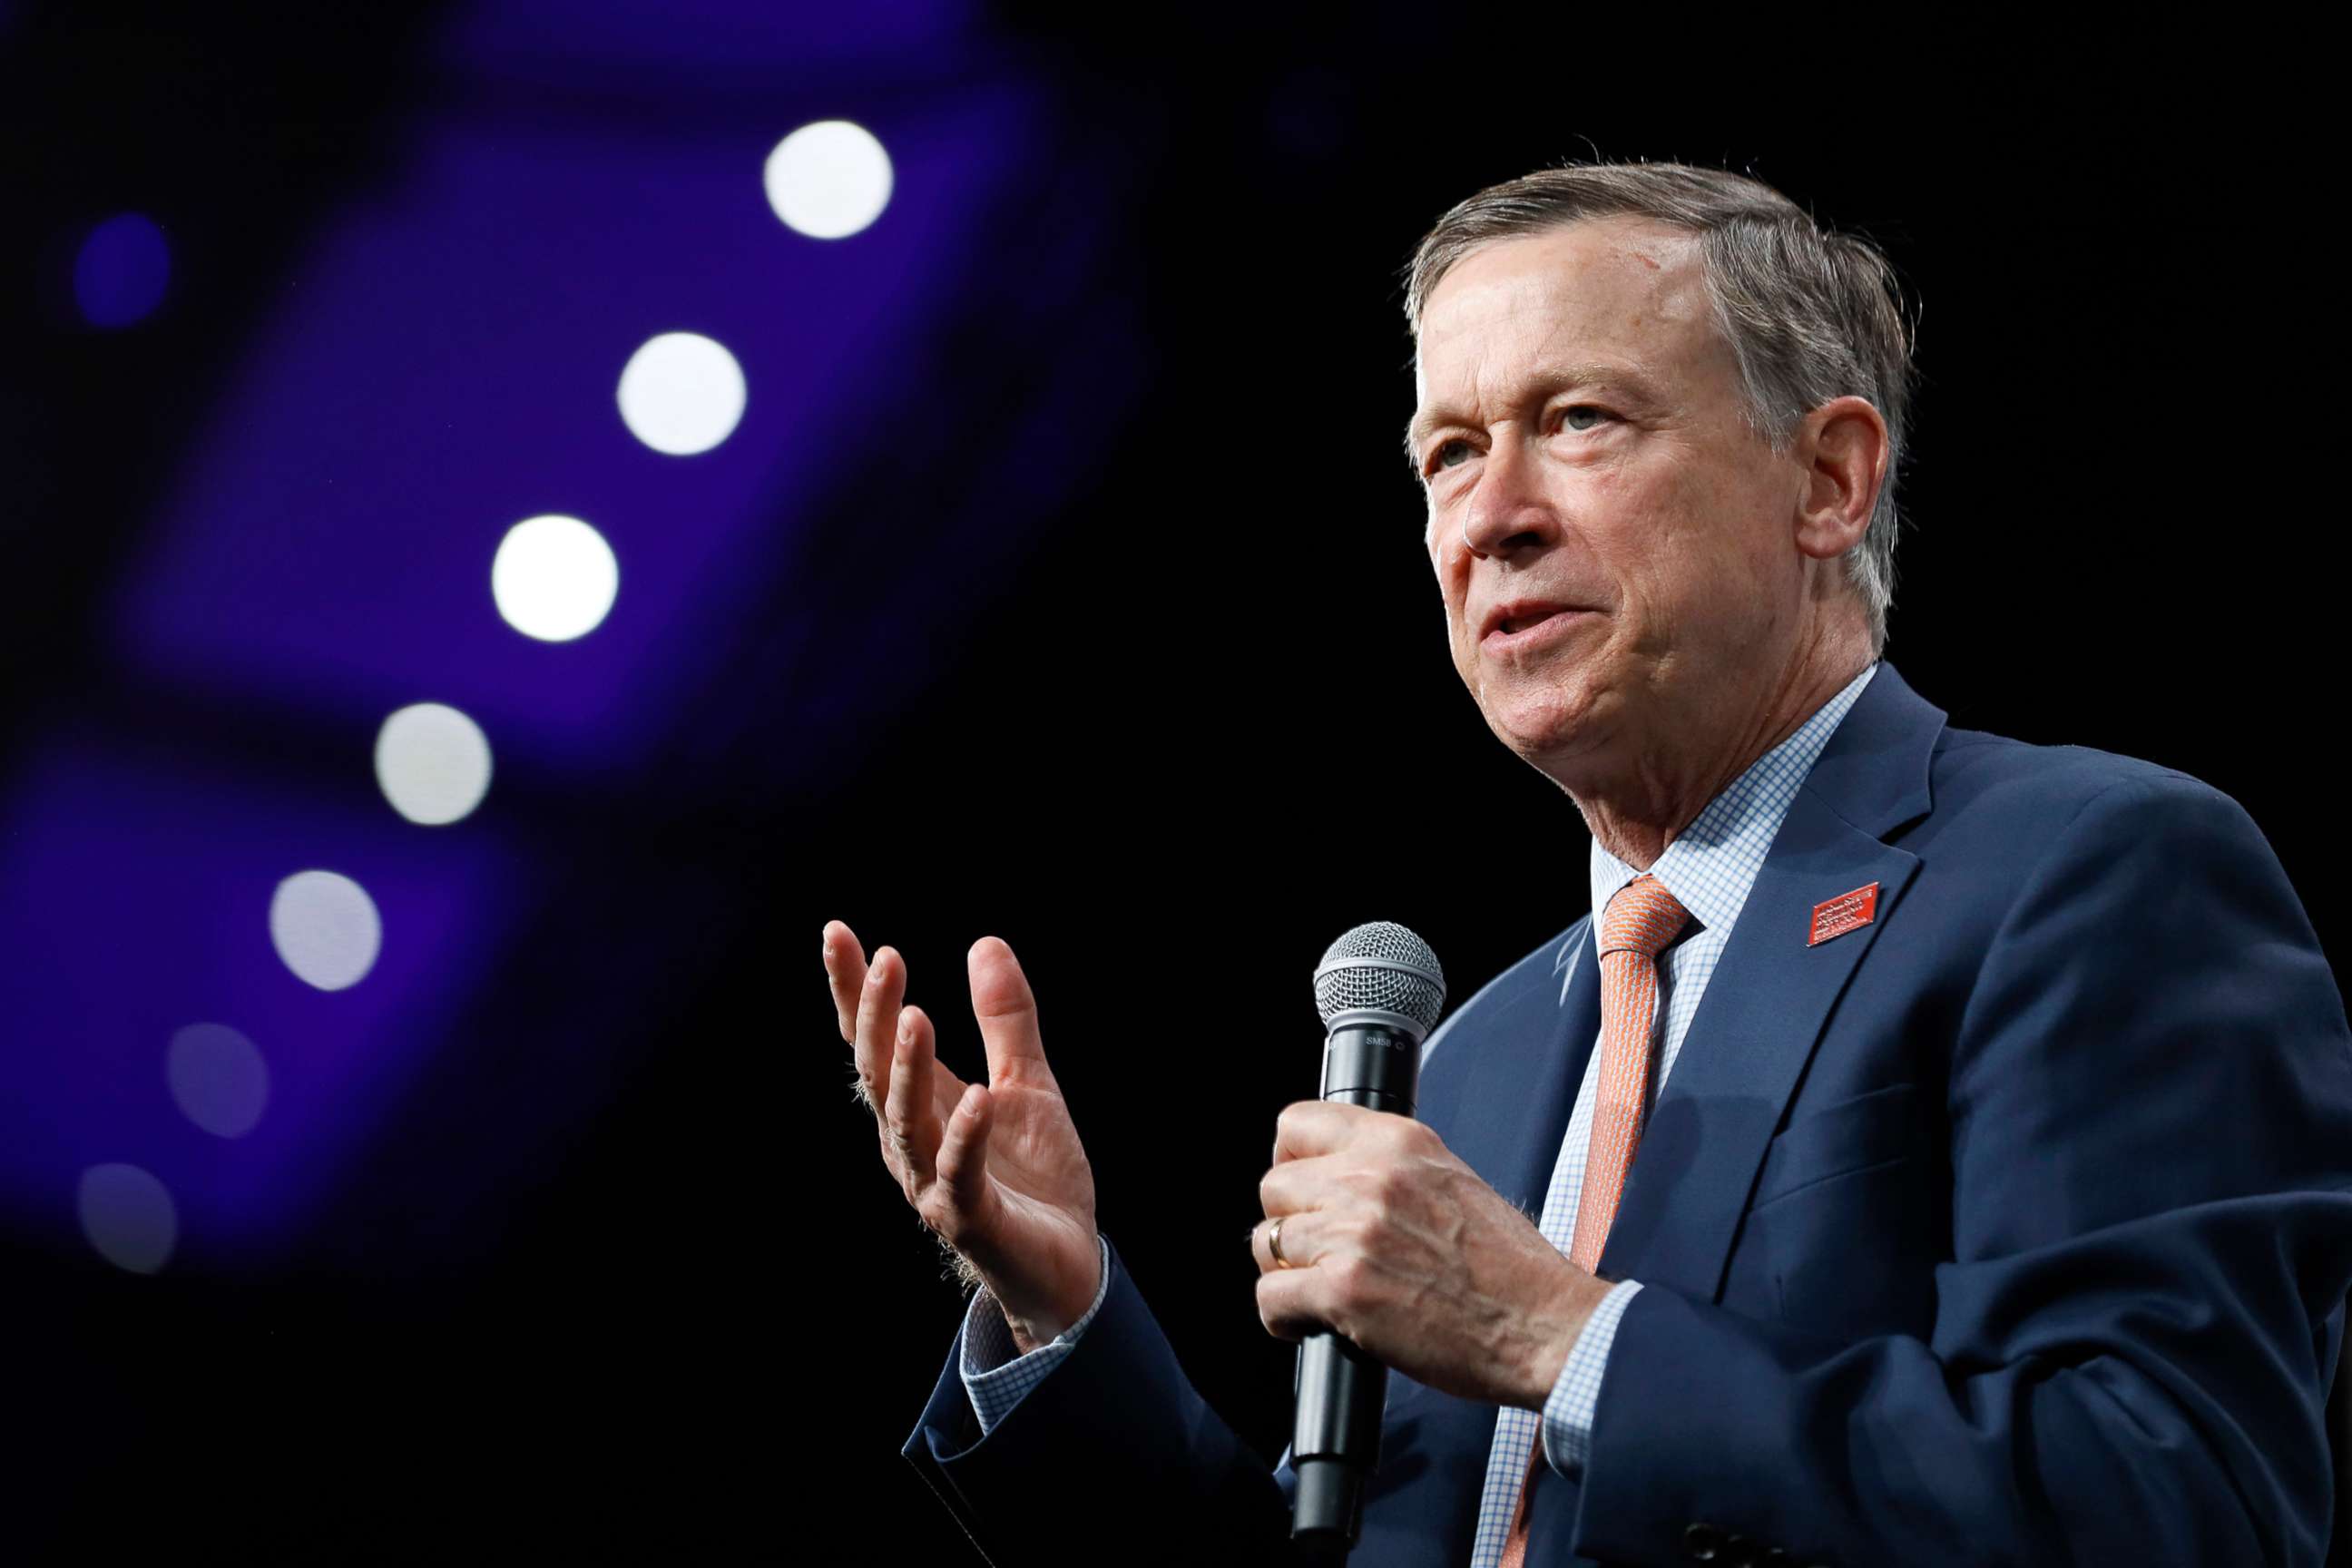 PHOTO: In this Aug. 10, 2019, file photo, Democratic presidential candidate and former Colorado Gov. John Hickenlooper speaks in Des Moines, Iowa.